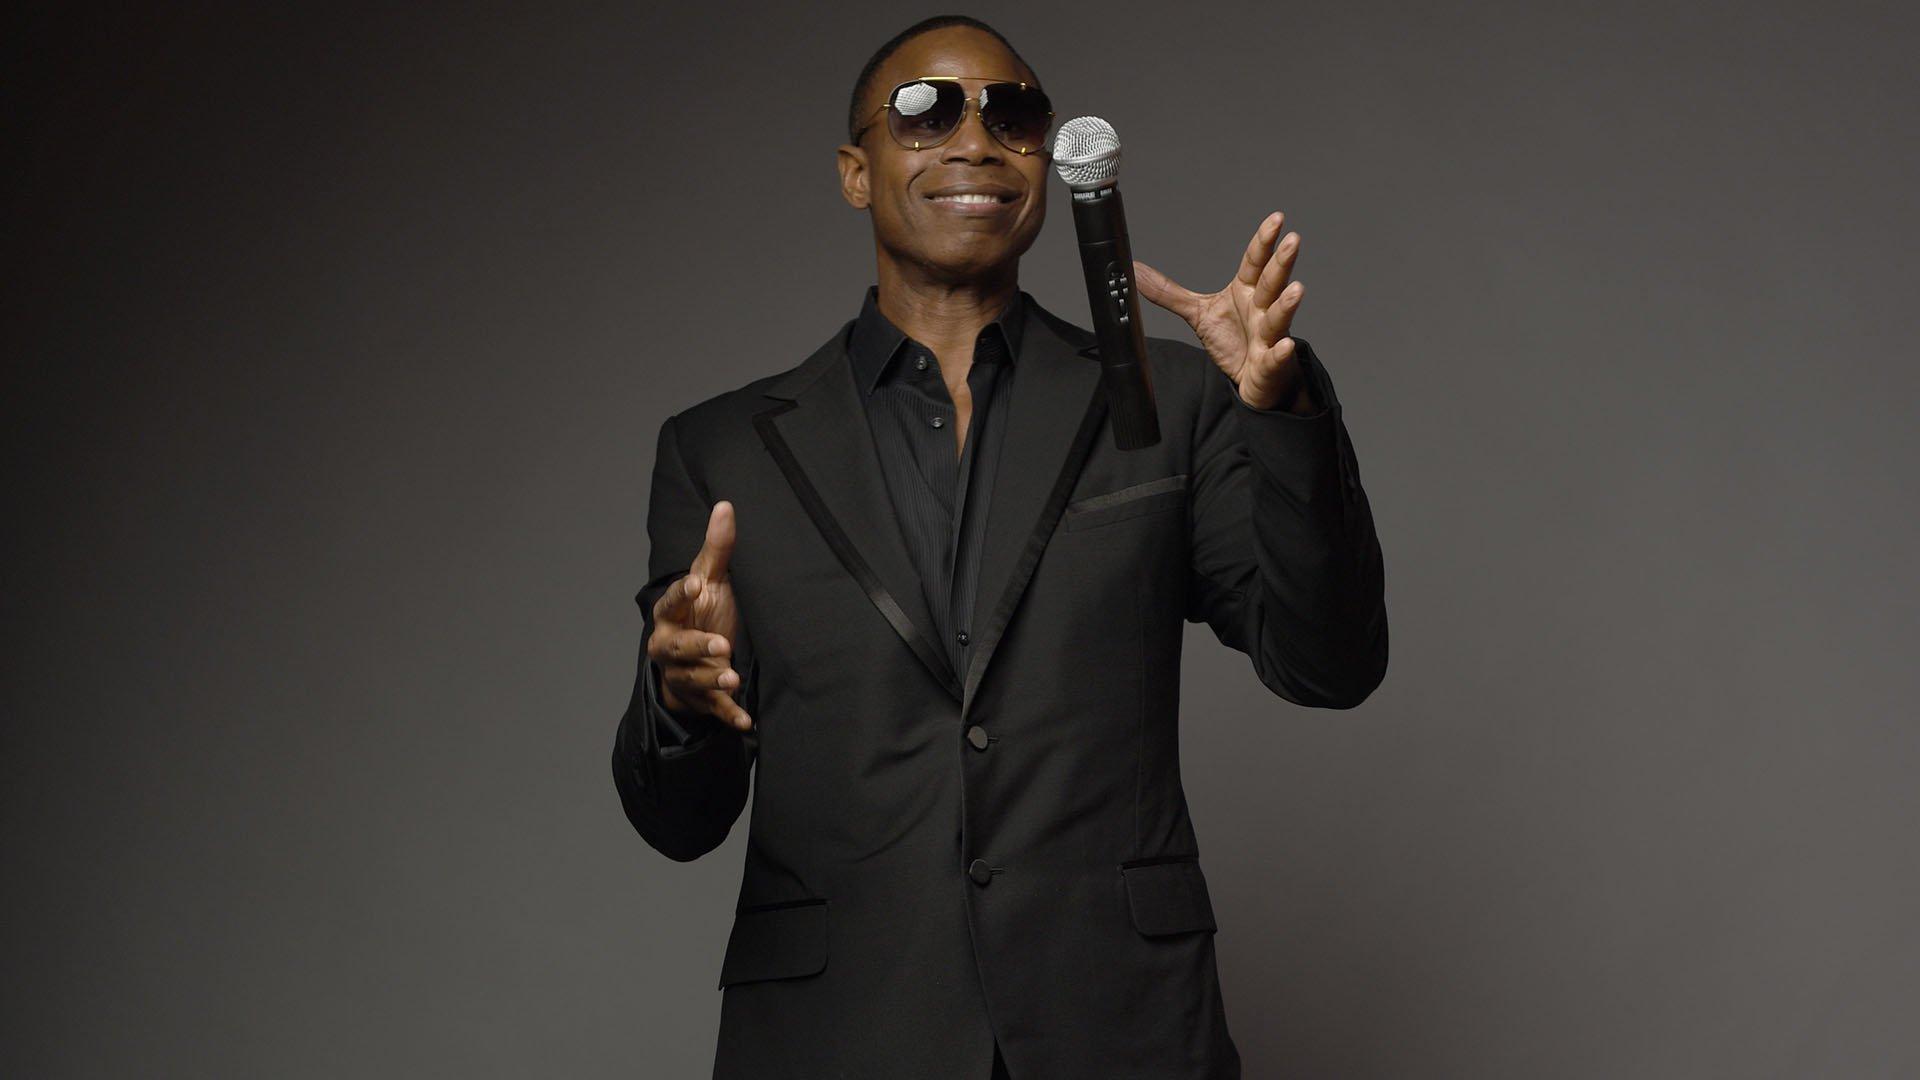 Doug E. Fresh smiles and catches a microphone